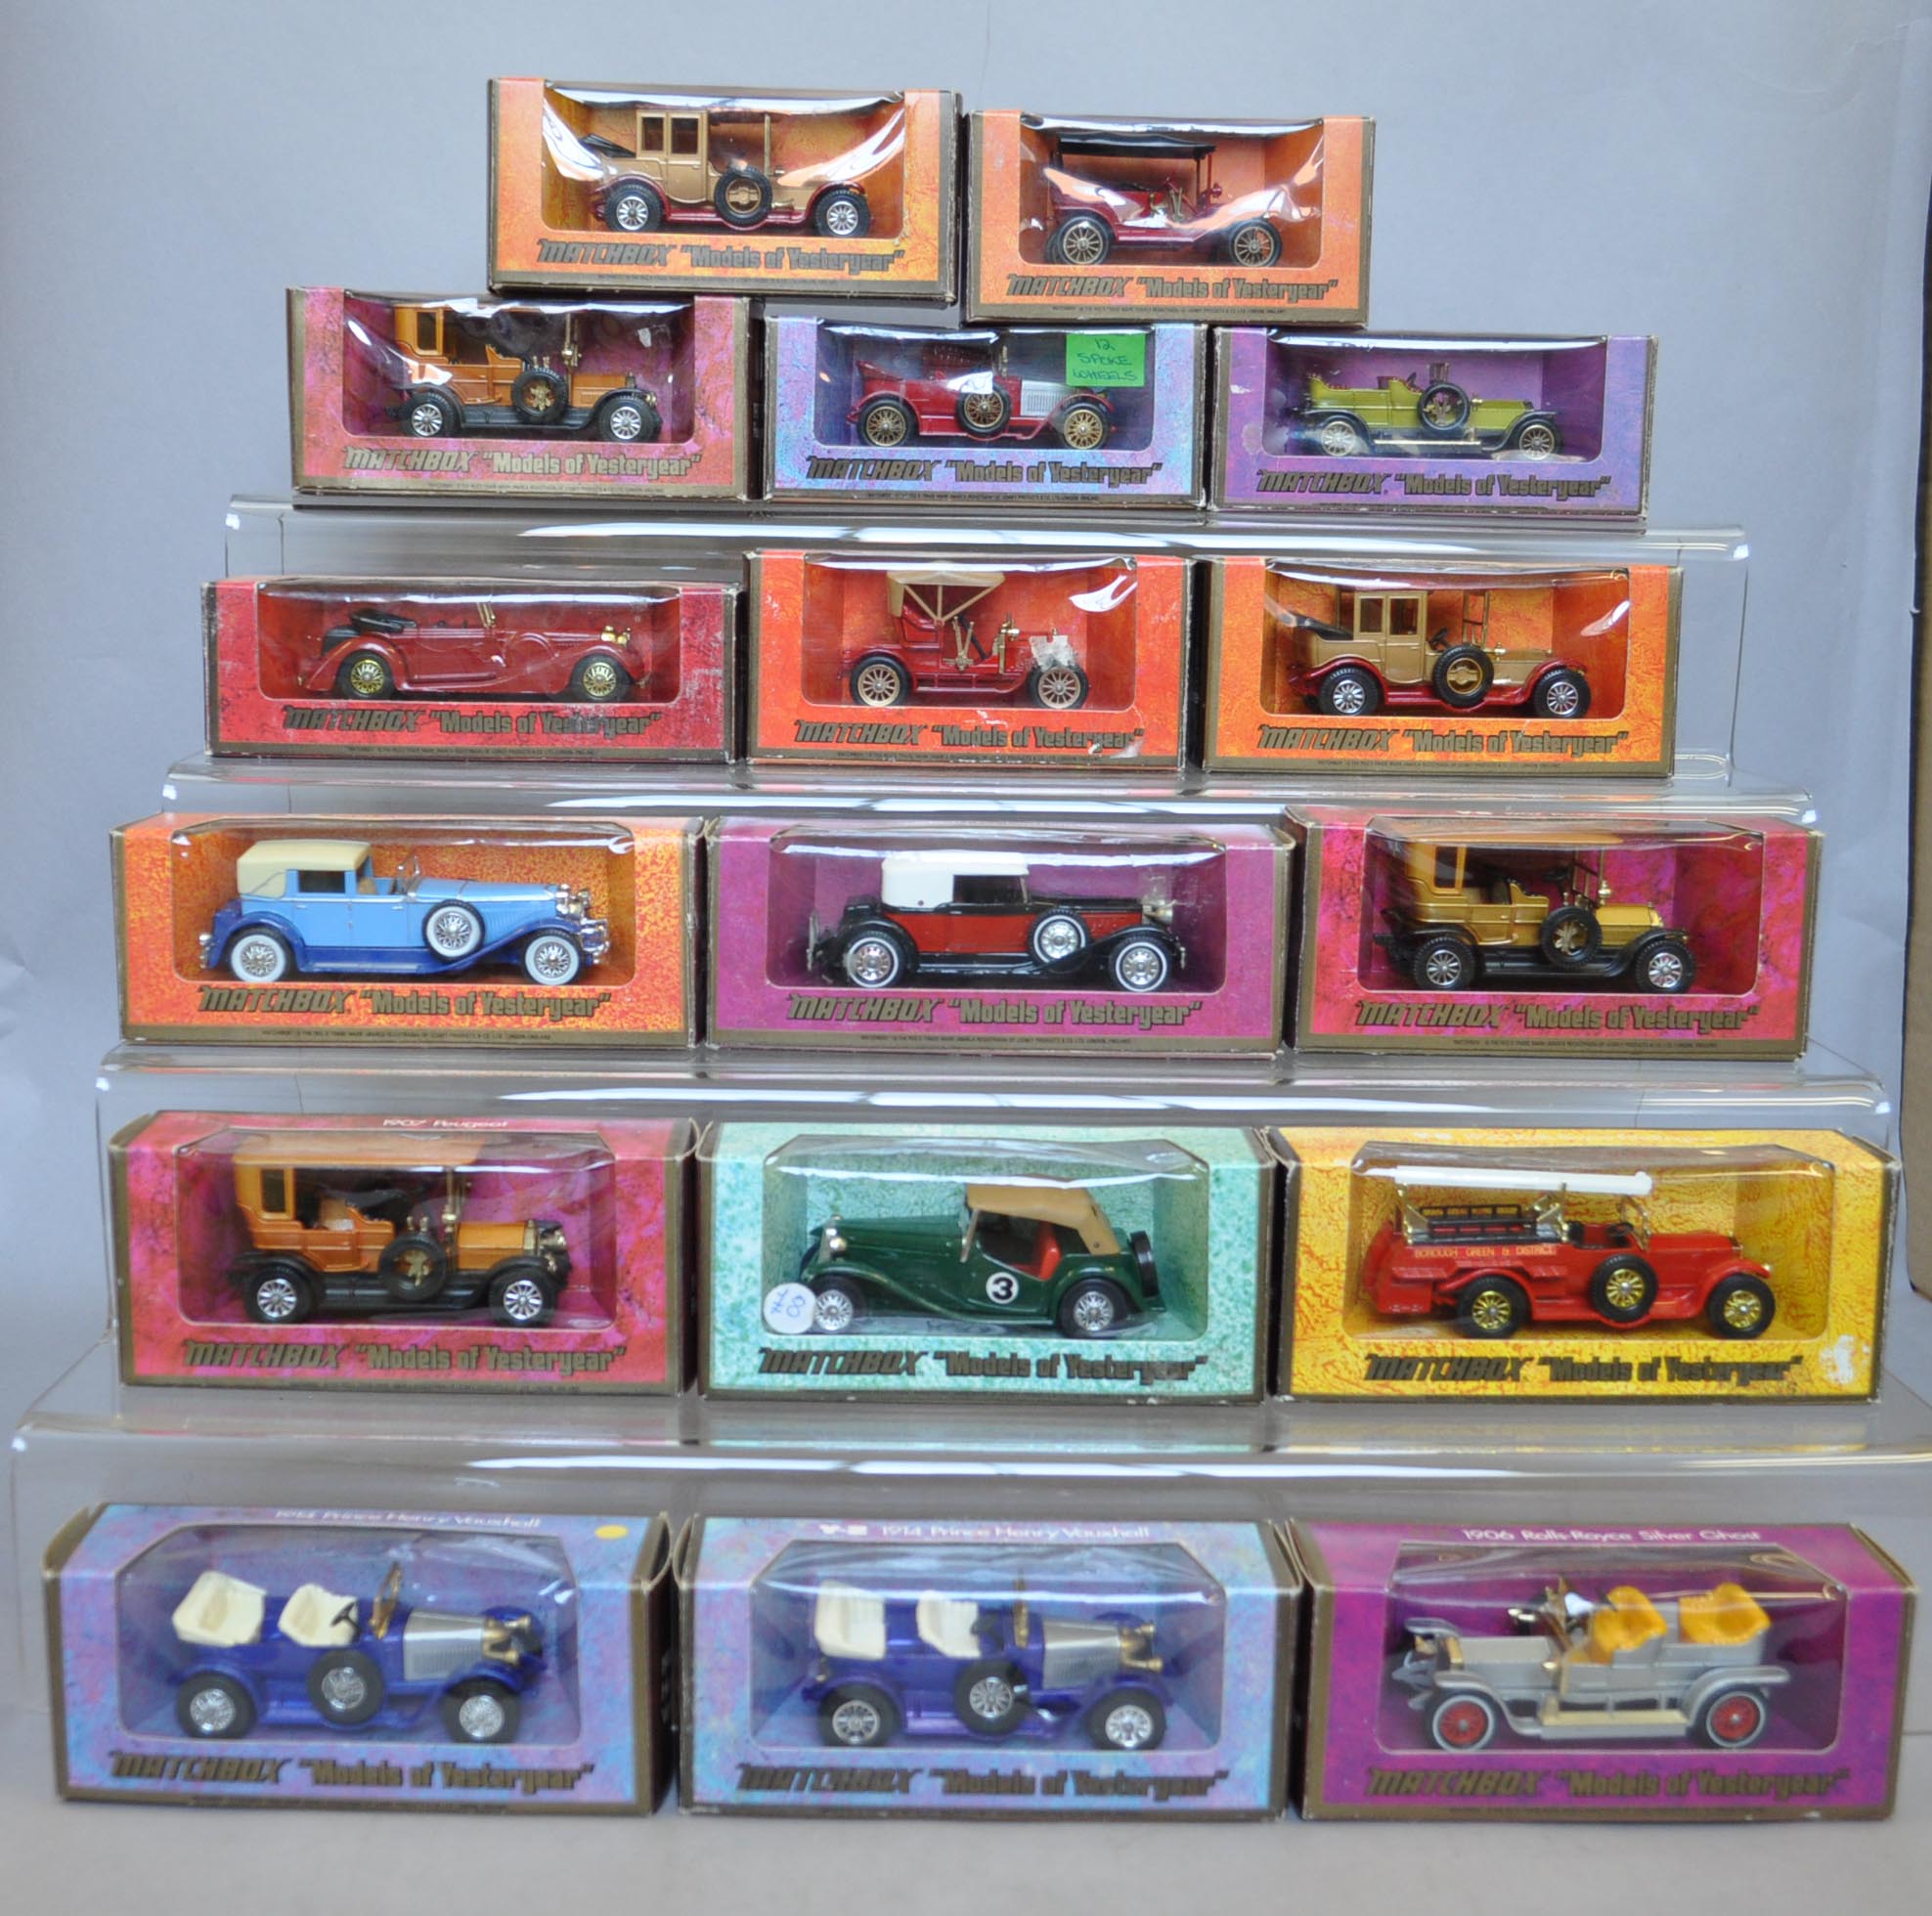 17 x Lesney Matchbox Models of Yesteryear in coloured boxes. Overall appear VG, box conditions vary.